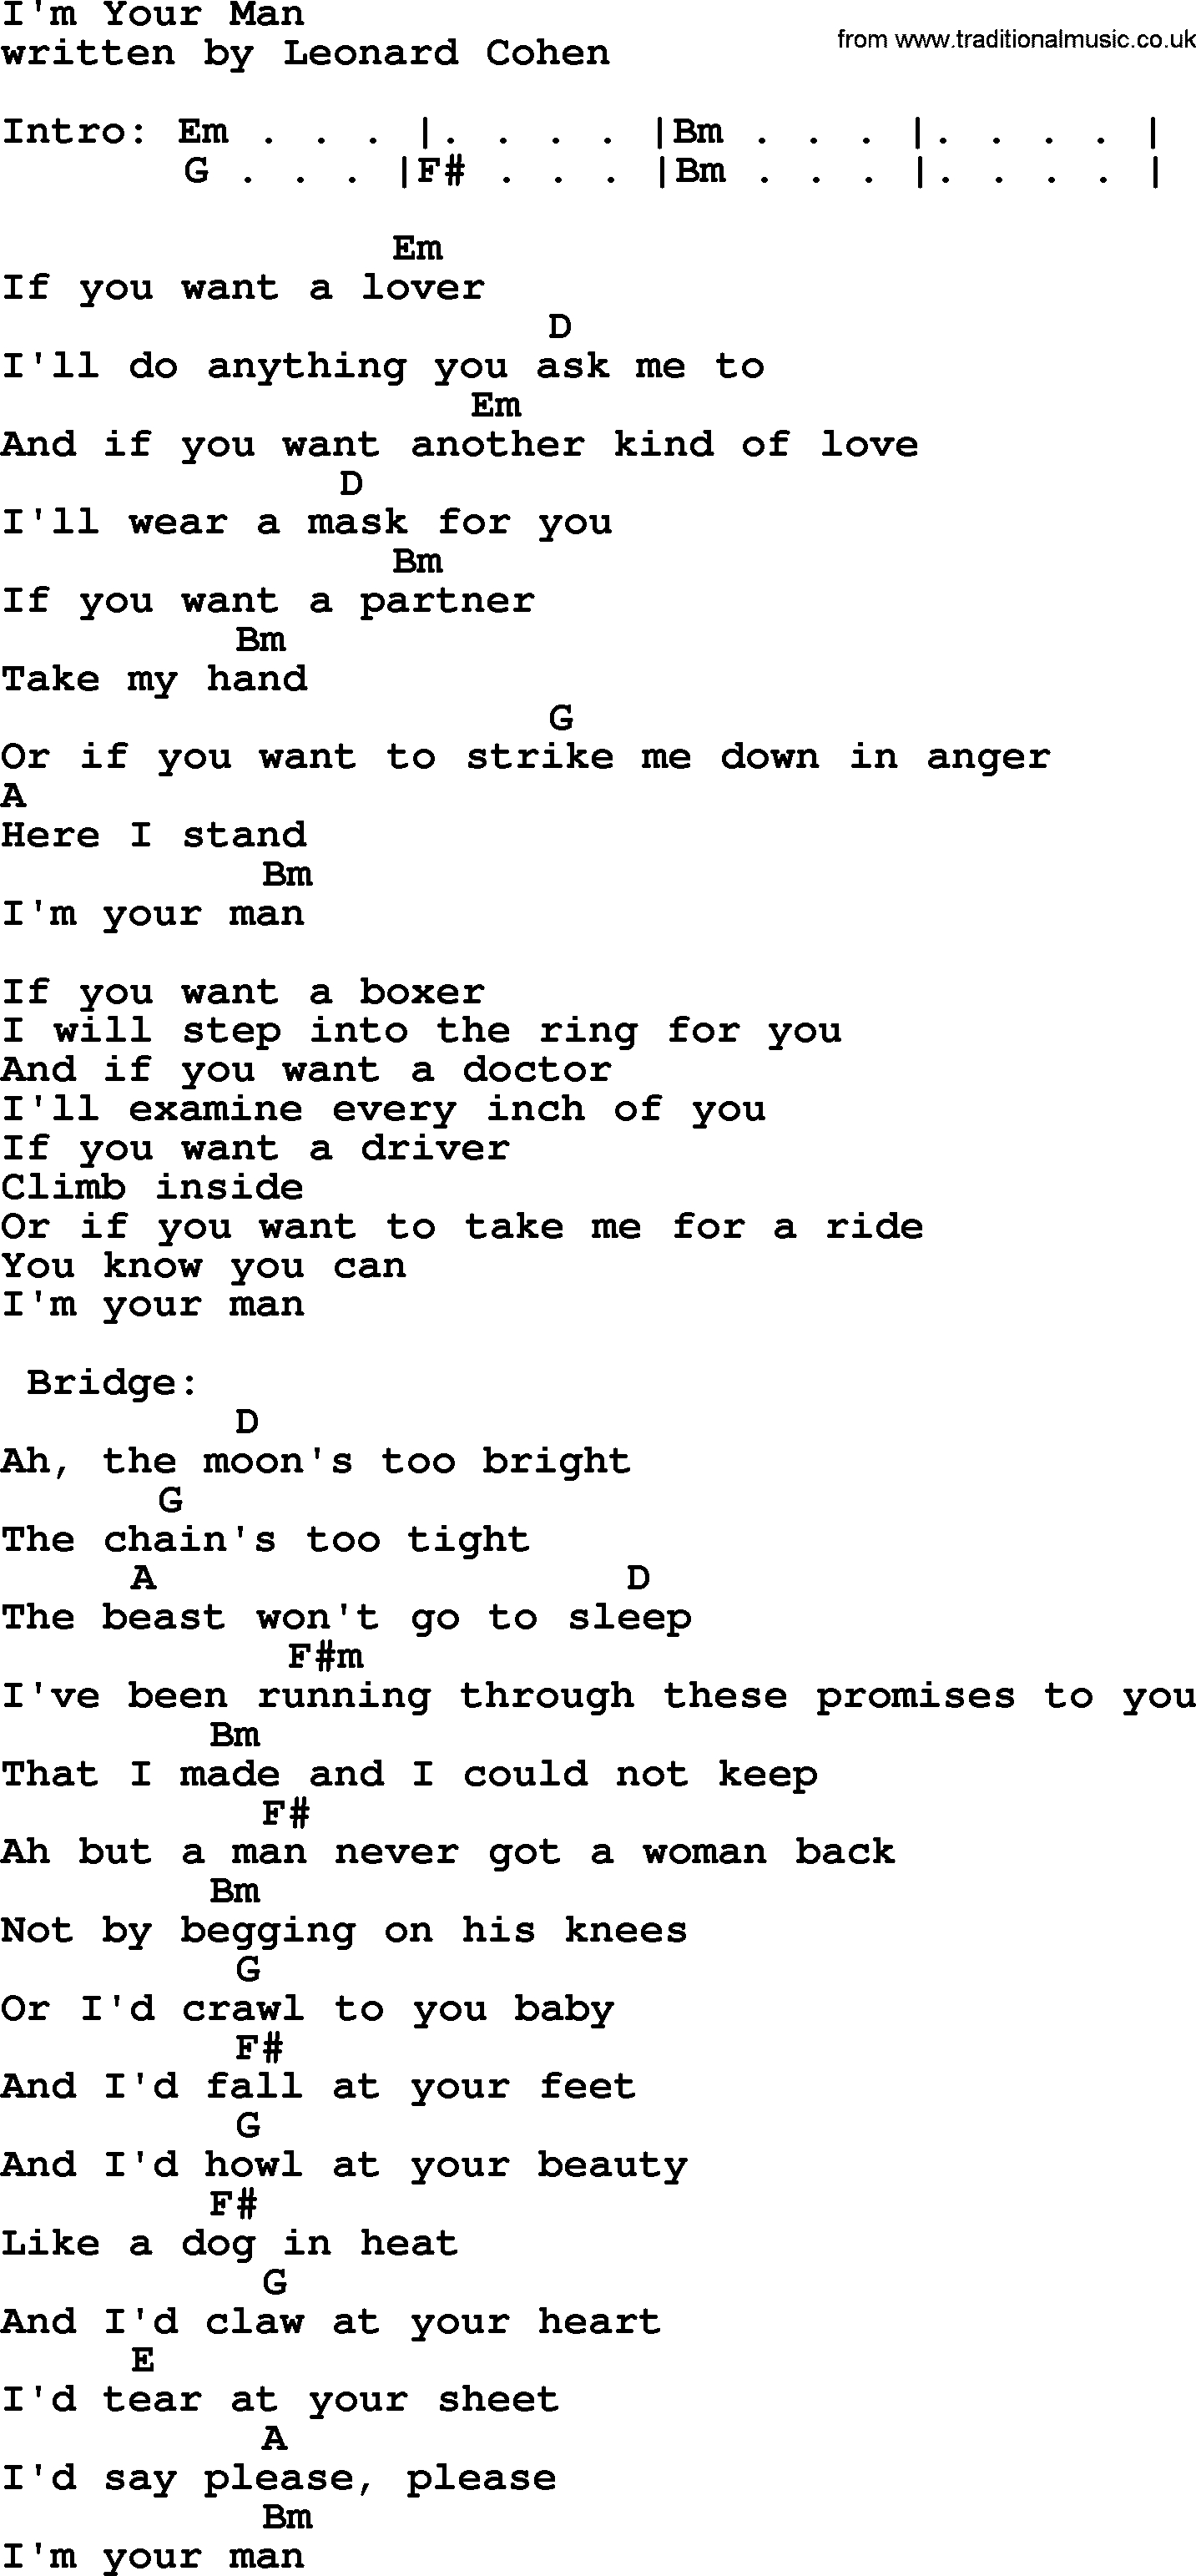 When I Was Your Man Chords Leonard Cohen Song Im Your Man Lyrics And Chords